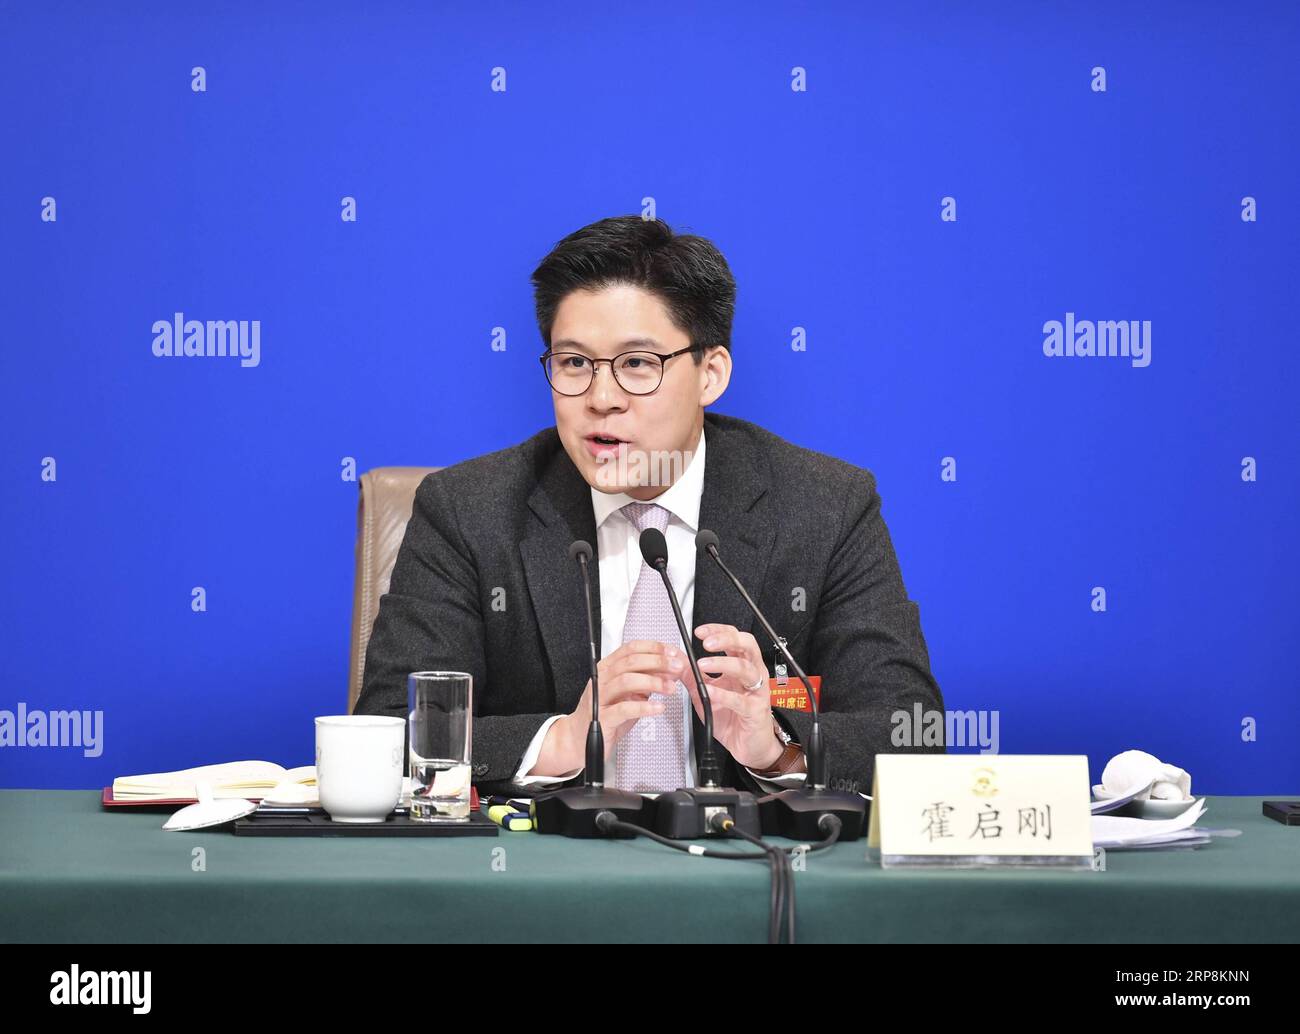 (190310) -- BEIJING, March 10, 2019 -- Kenneth Fok Kai-kong, a member of the 13th National Committee of the Chinese People s Political Consultative Conference (CPPCC), attends a press conference on political advisors performance of duties in the new era for the second session of the 13th CPPCC National Committee in Beijing, capital of China, March 10, 2019. ) (TWO SESSIONS)CHINA-BEIJING-CPPCC-PRESS CONFERENCE (CN) LixRan PUBLICATIONxNOTxINxCHN Stock Photo